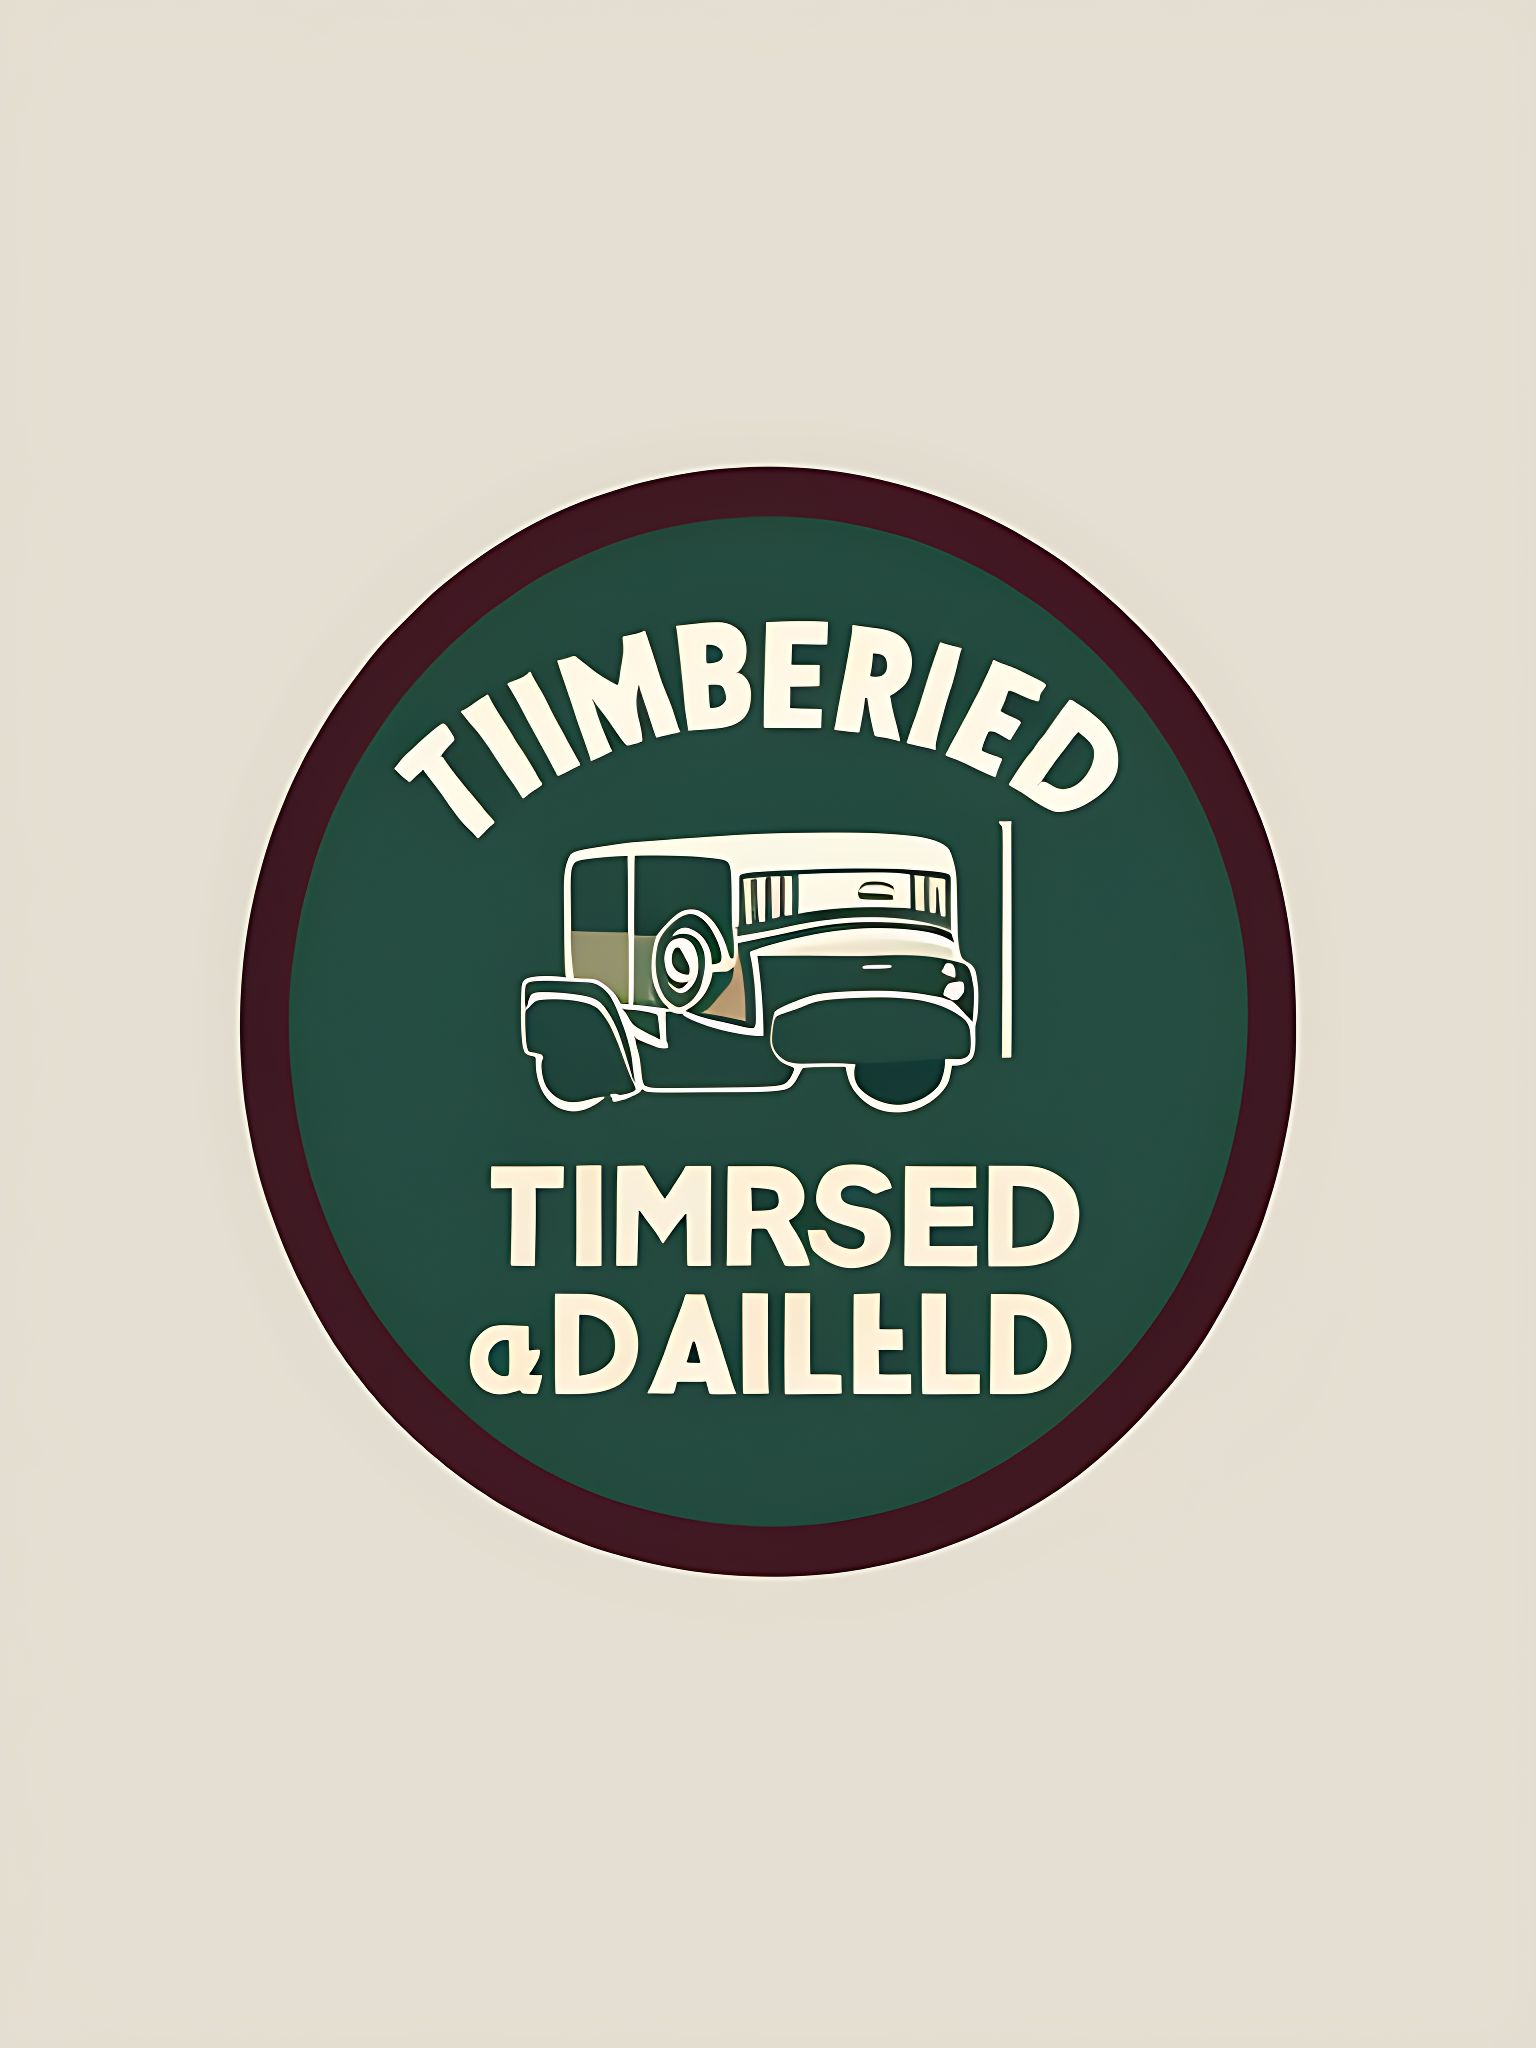 al: dark green round logo with TIMBERLAND AUTO LTD and slogan of THE  TRUSTED AUTO DEALER center with a small car with forest background